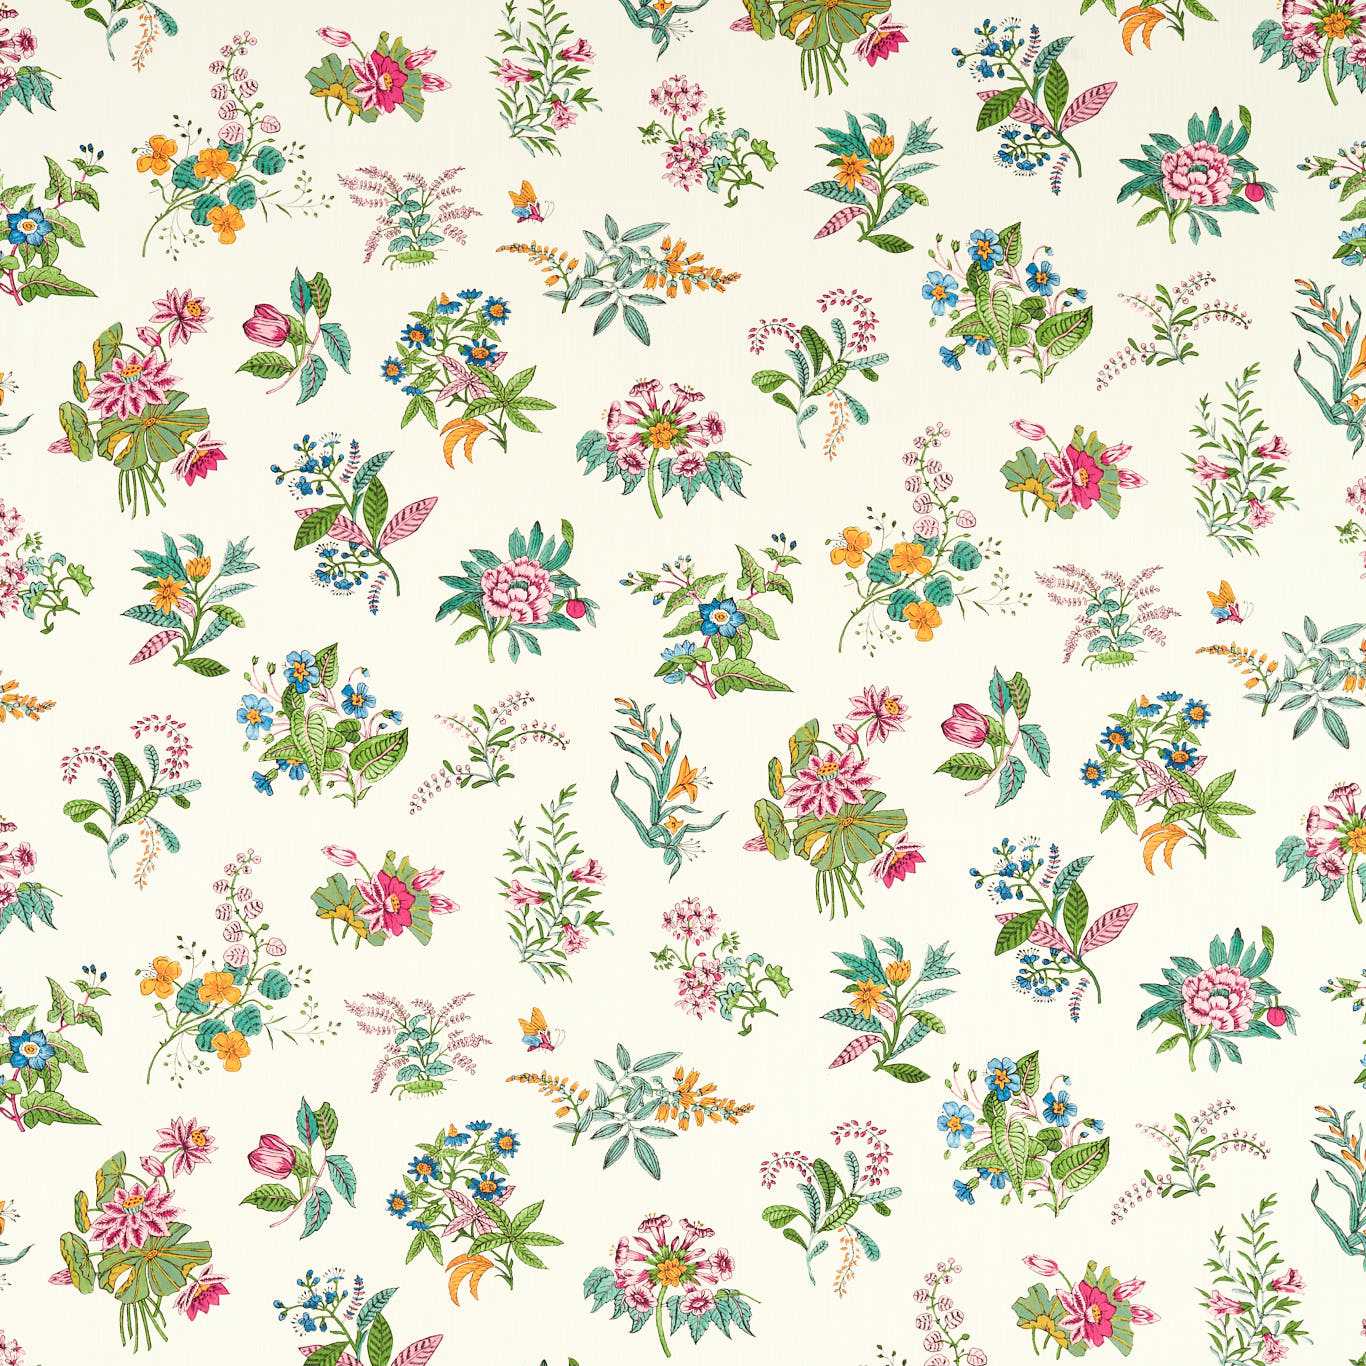 Woodland Floral Peridot/Ruby/Pearl Fabric by HAR